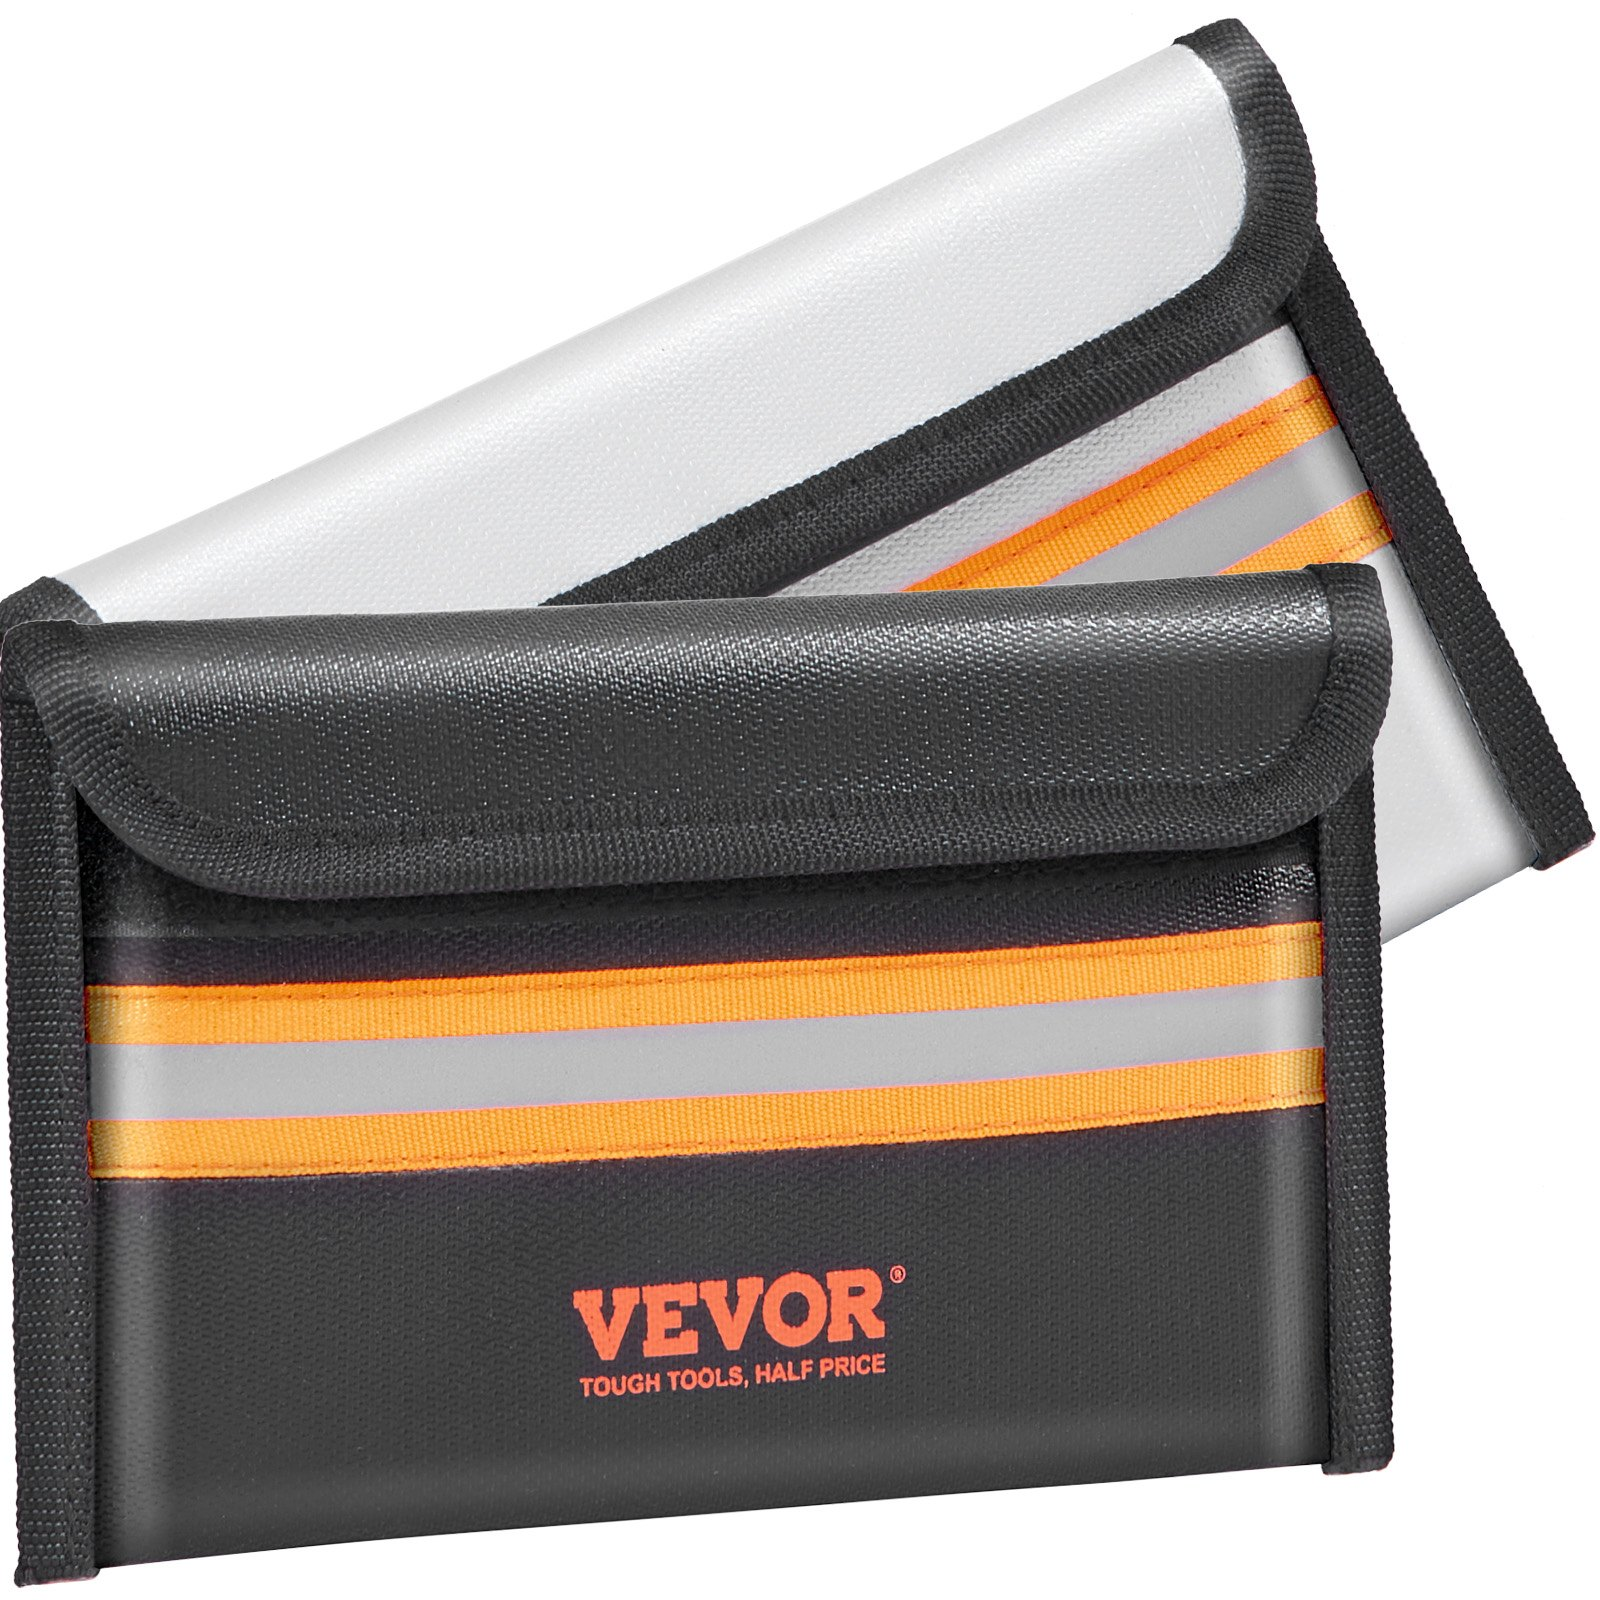 VEVOR Fireproof Document Bag, 2 pcs 8"x5" Fireproof Money Bag 2000℉, Fireproof and Waterproof Bag with Zipper and Reflective Strip, for Money, Documents, Jewelry and Passport, Goodies N Stuff